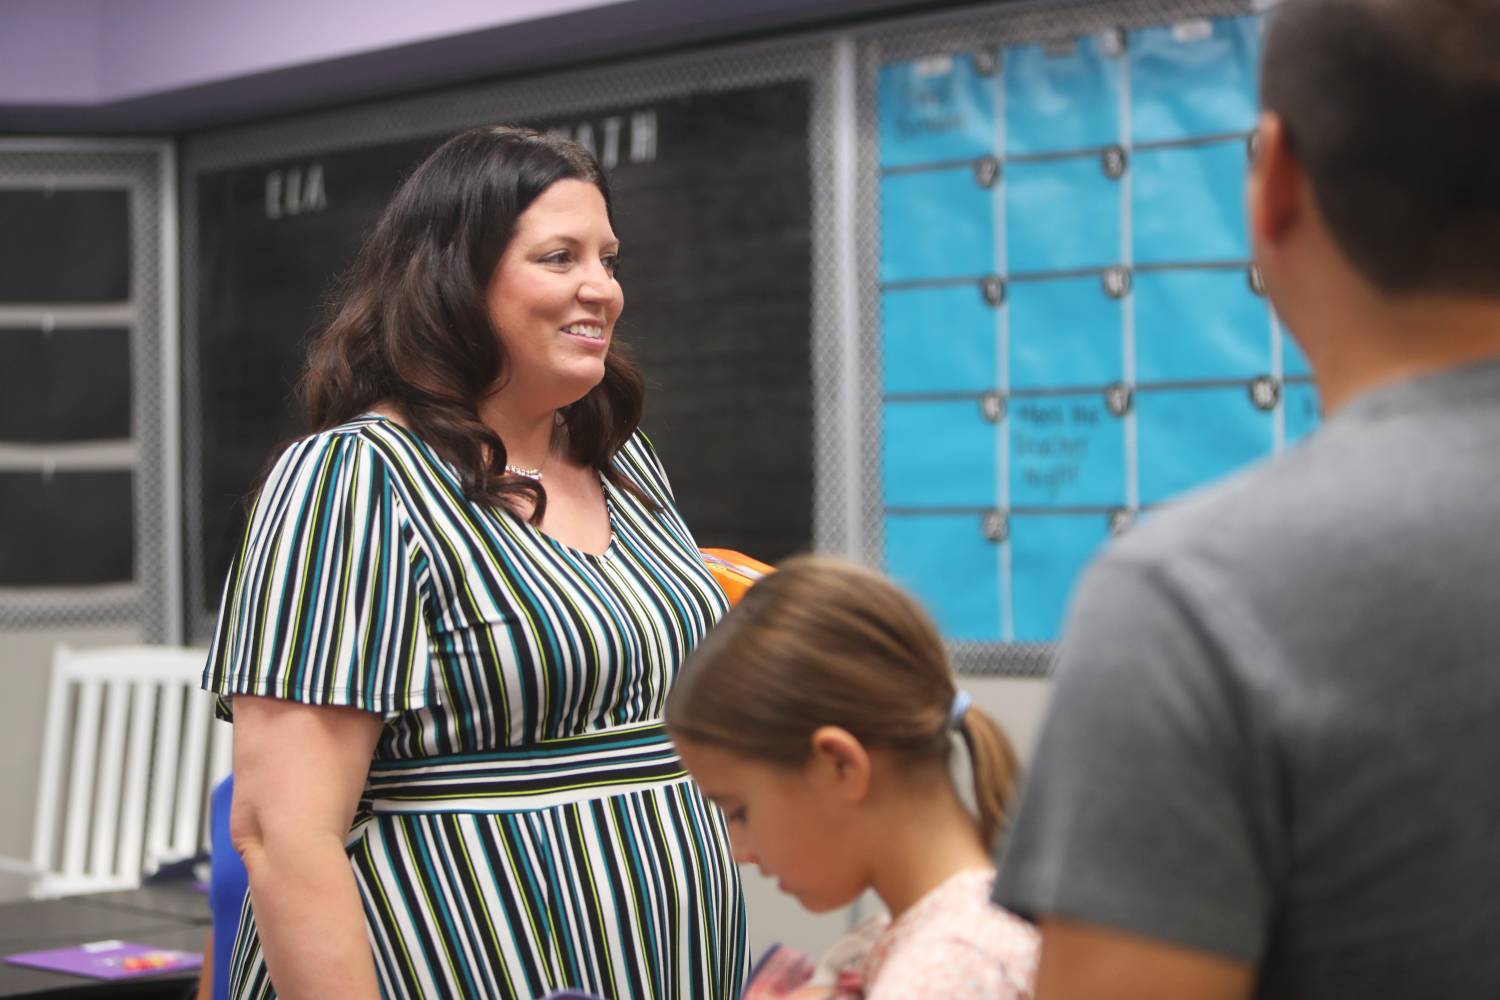 Fourth grade teacher Jessica Shmeckpeper meets parents and students at Kyrene de la Mirada Leadership Academy in Chandler on July 17, 2023.